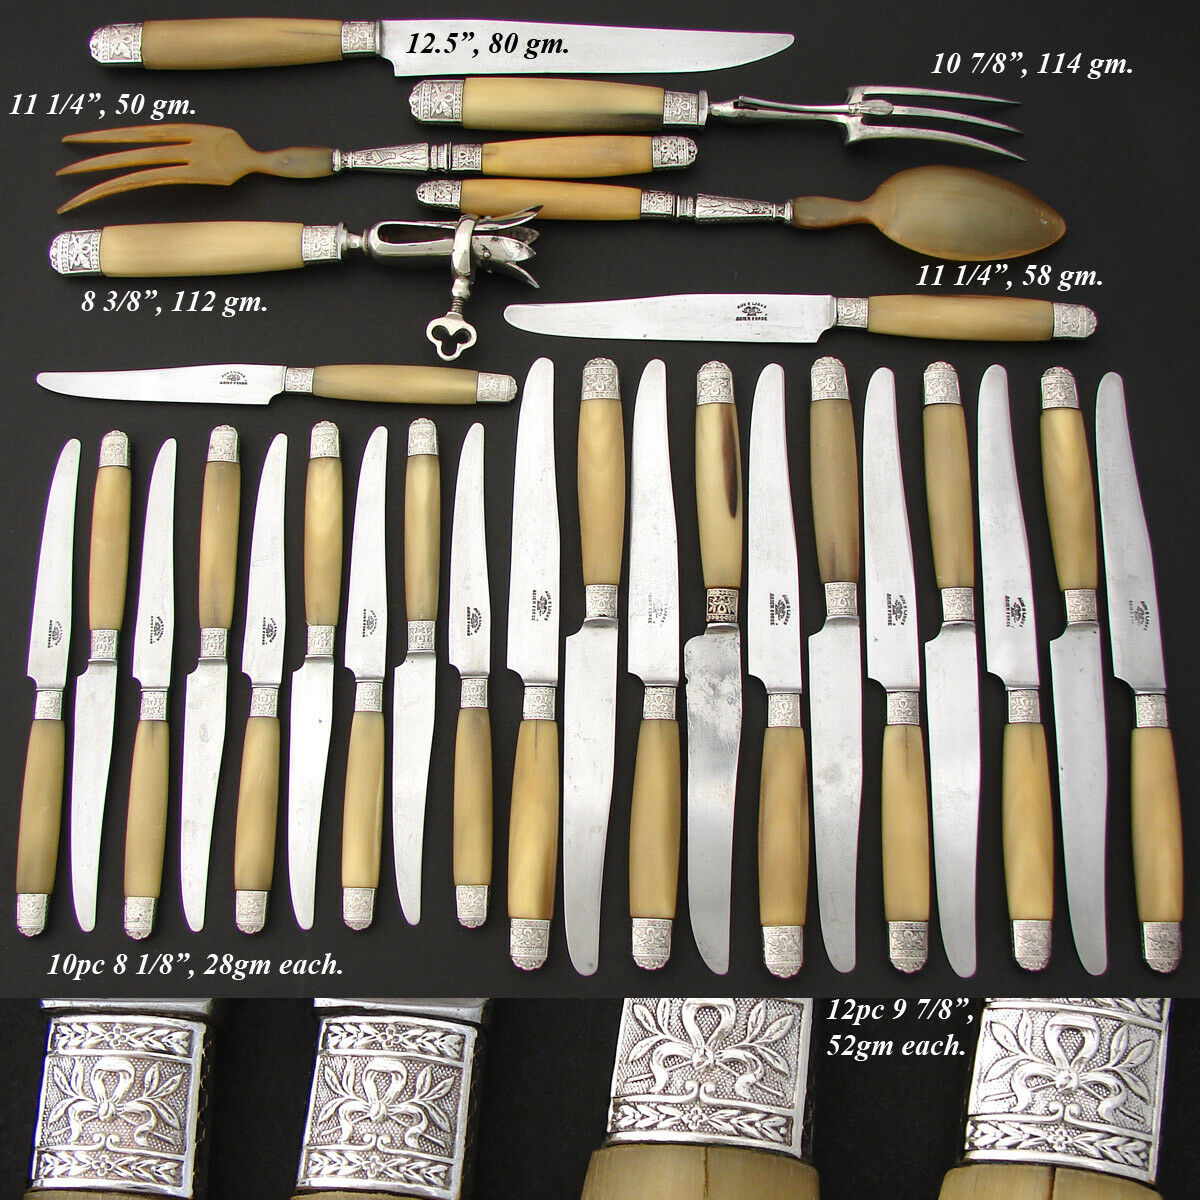 Antique French Empire Style 27pc Dinner Knife Set, Genuine Horn & Silver Handles